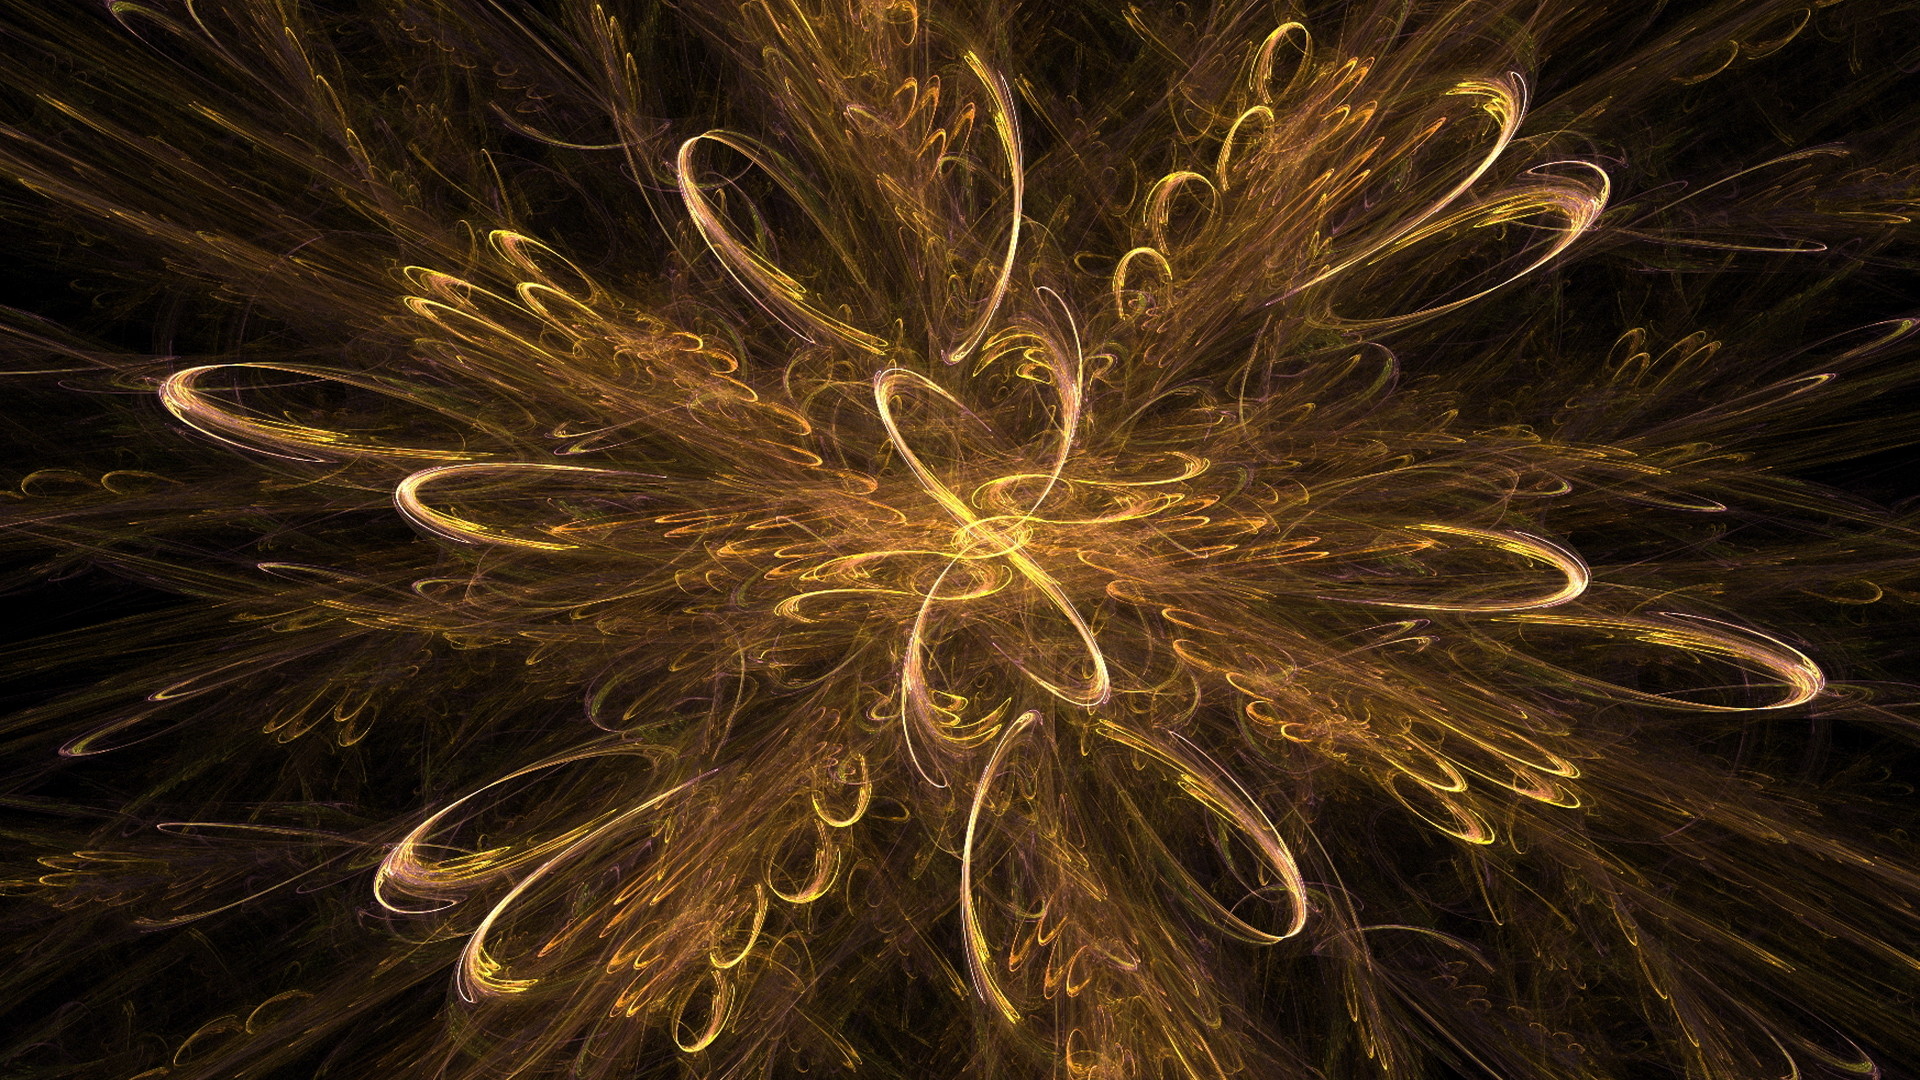 1920x1080 Black And Gold Abstract Wallpaper 8 High Resolution Wallpaper. Black And Gold  Abstract Wallpaper 8 High Resolution Wallpaper